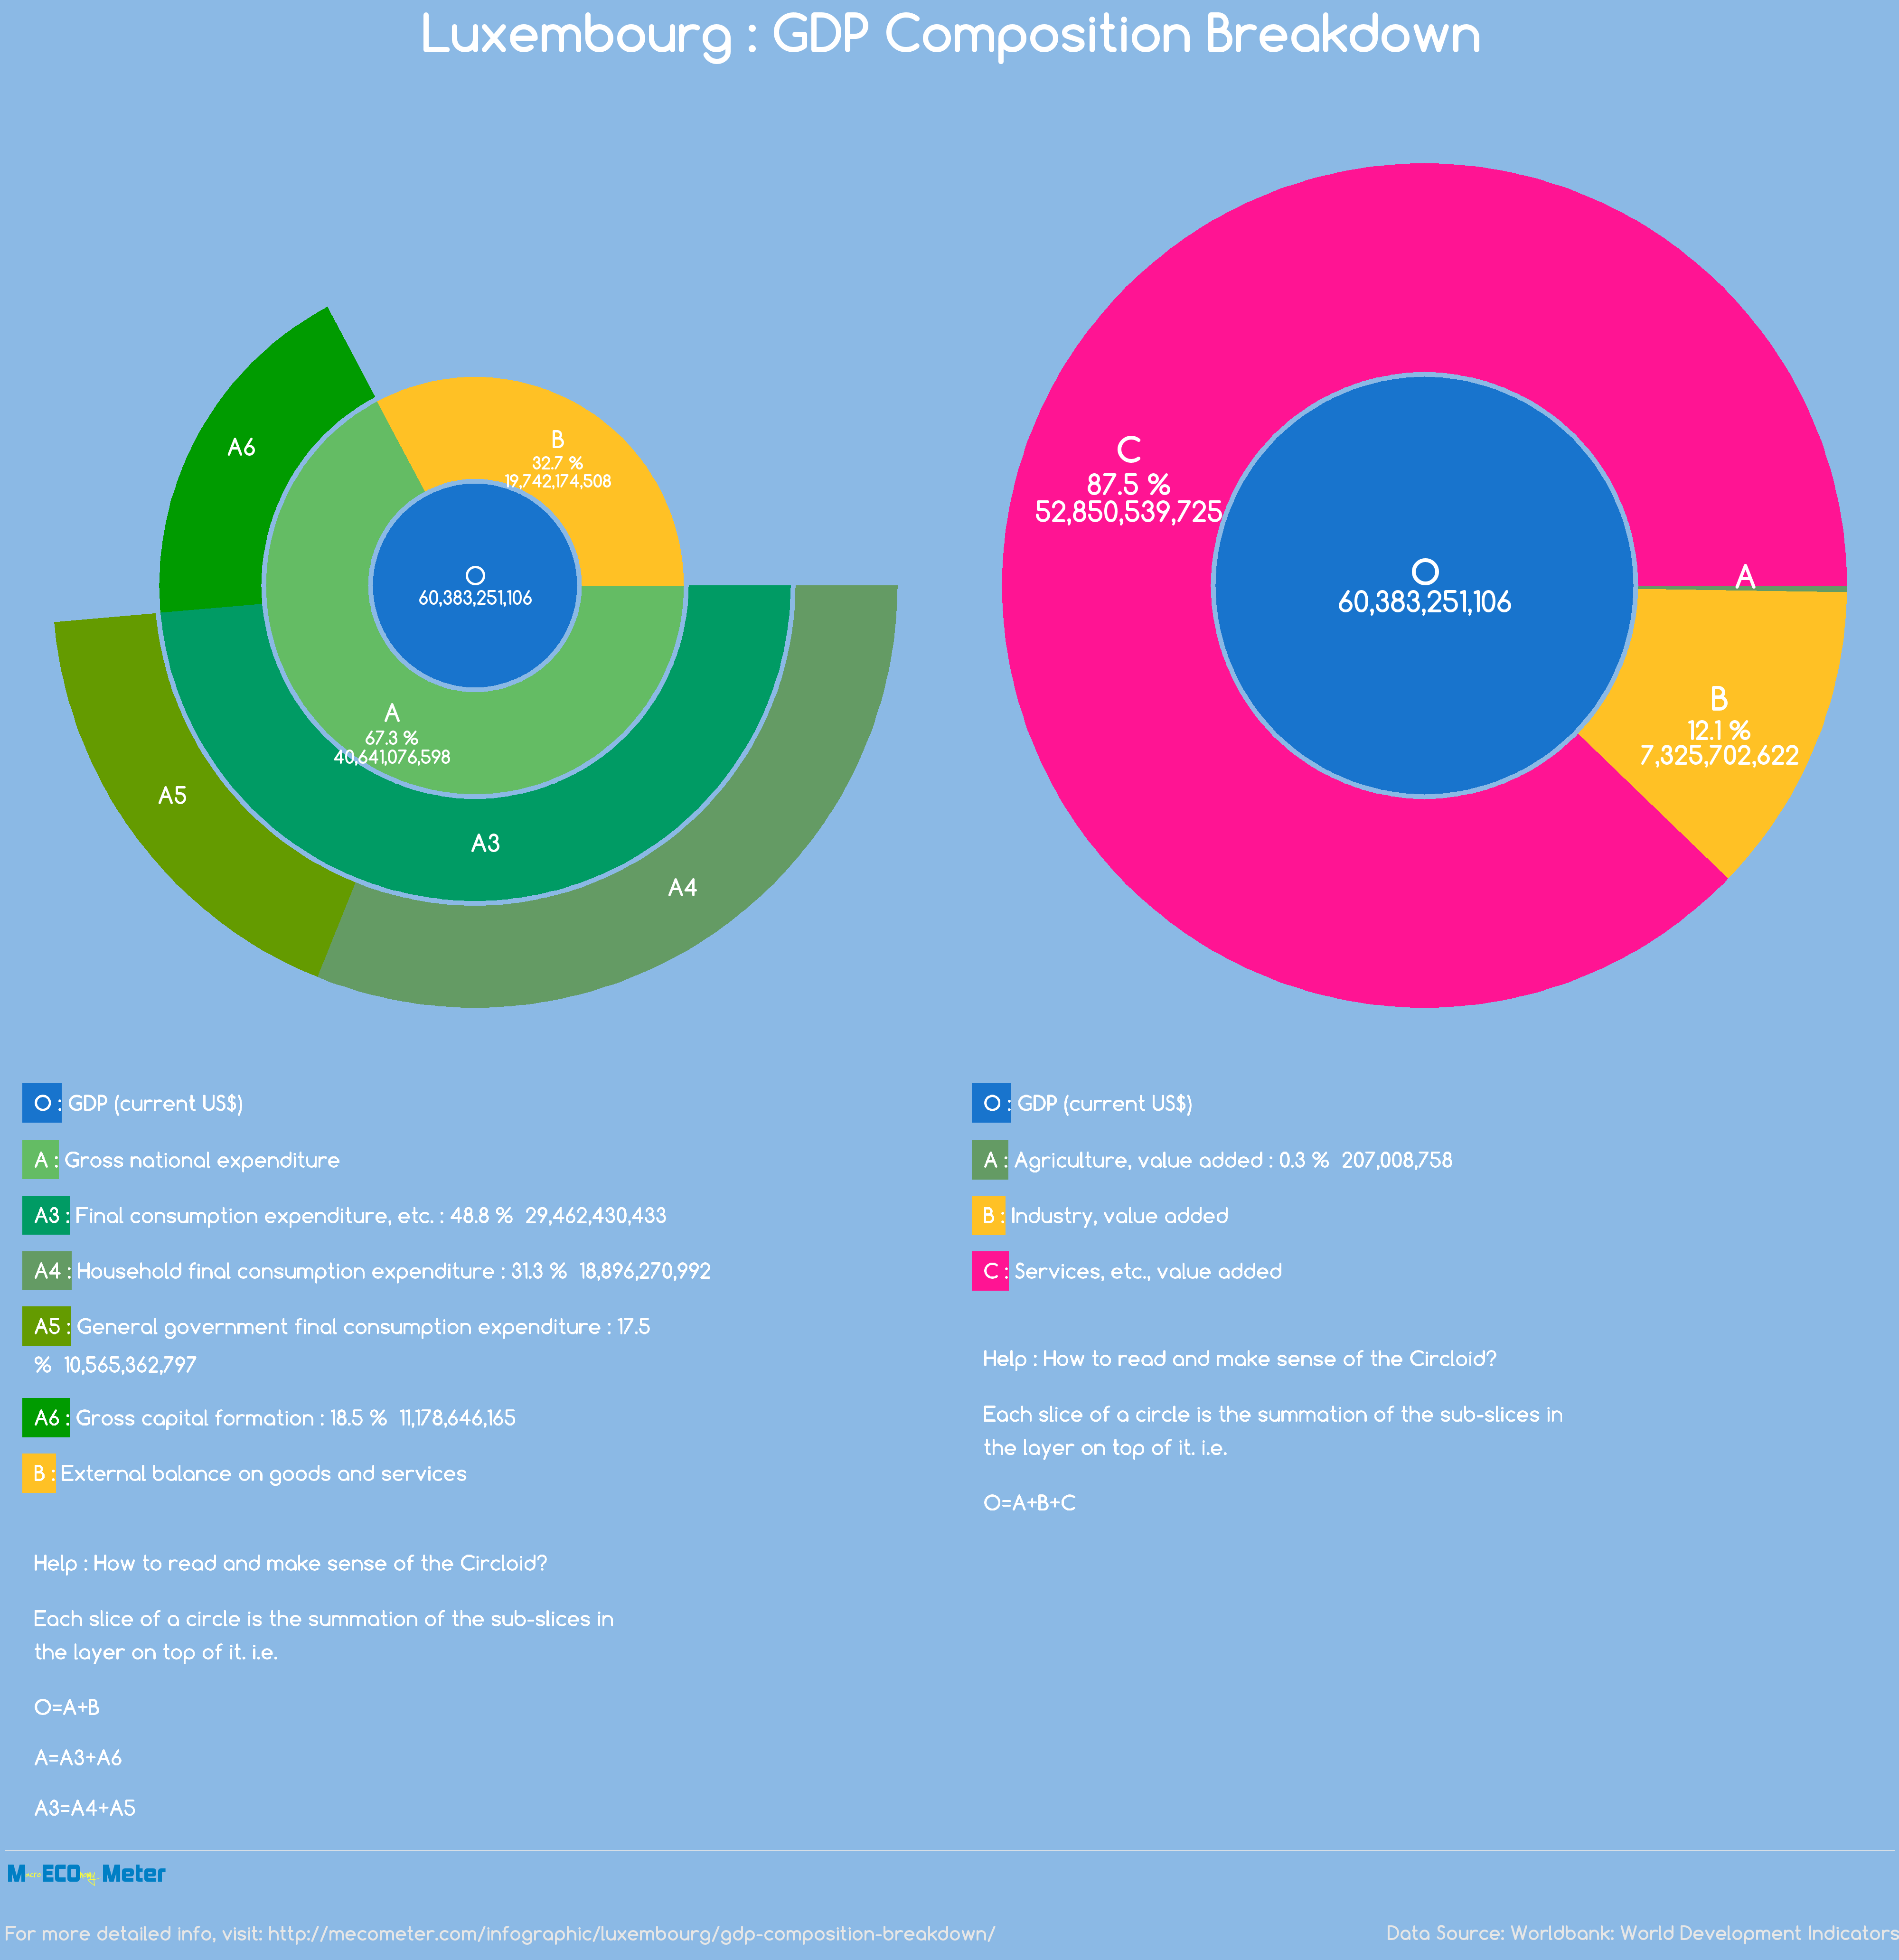 Luxembourg : GDP Composition Breakdown